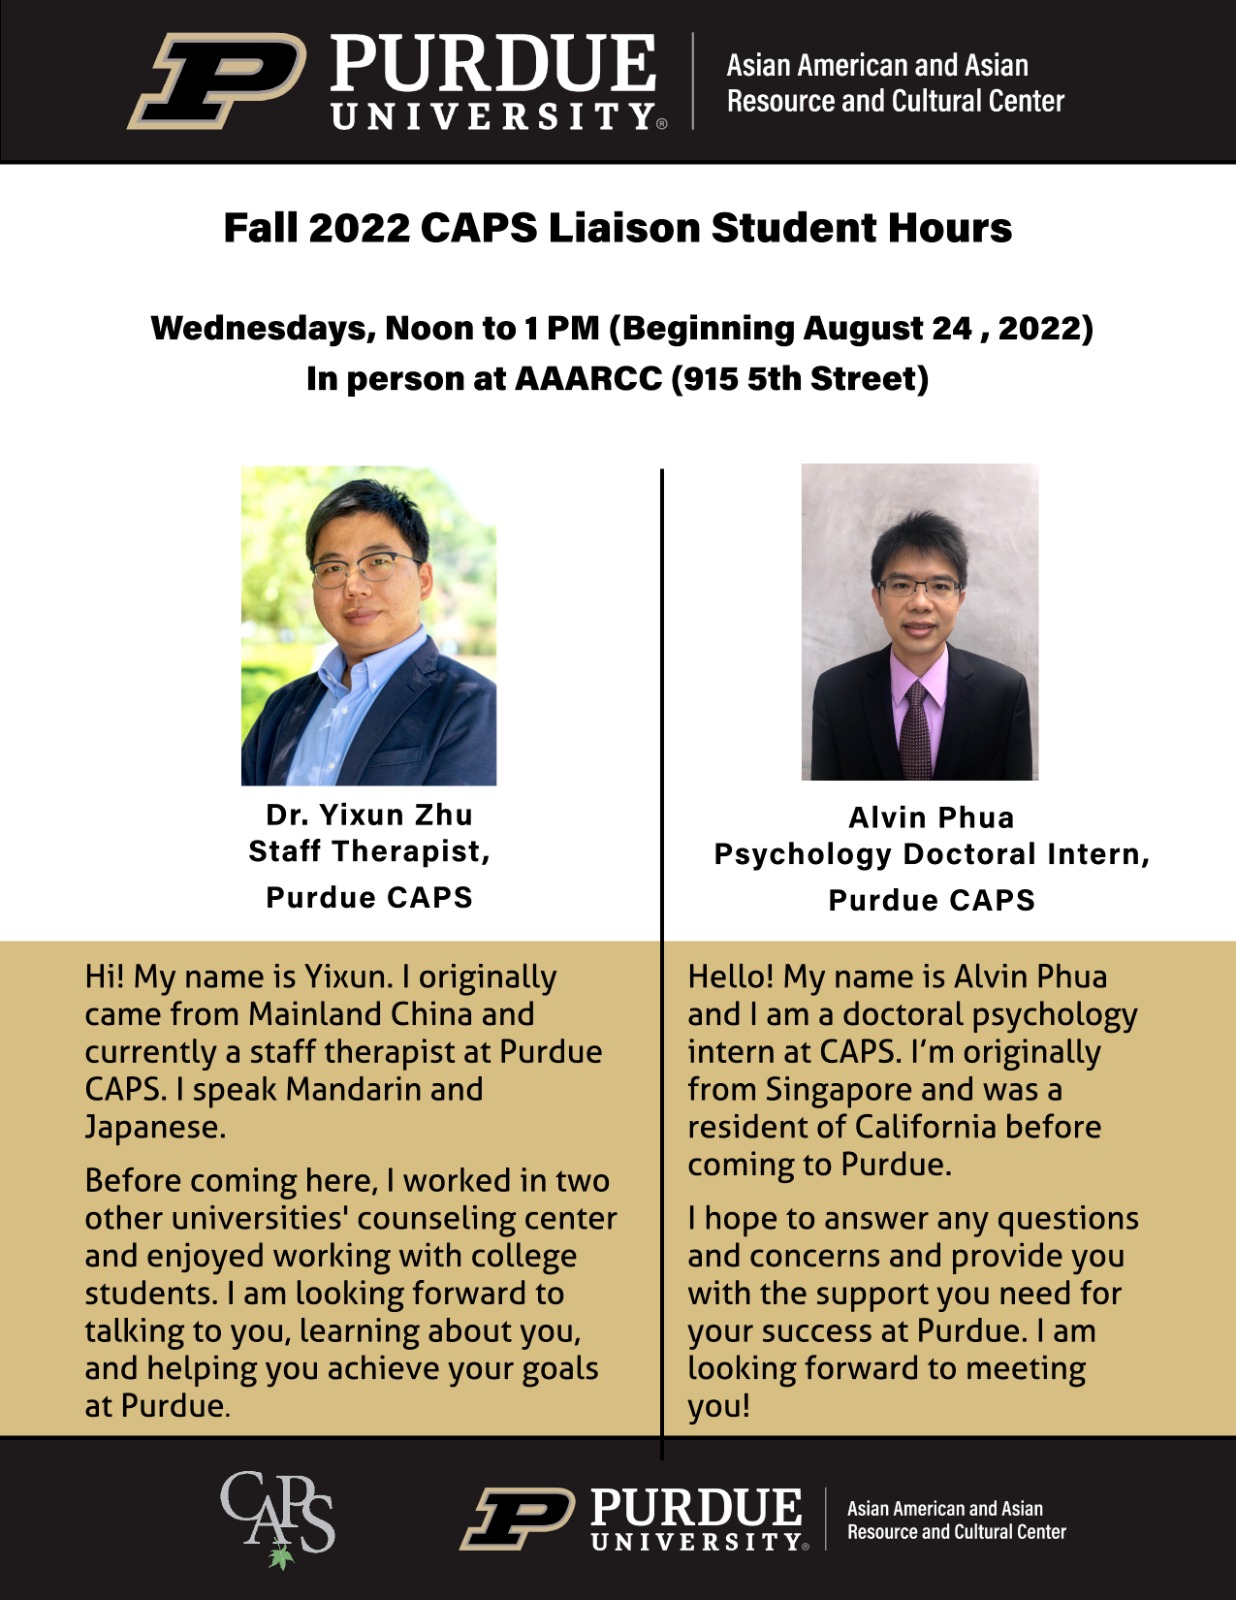 Reali-Tea Series: Purdue AAARCC & CAPS Fall 22 Date & Time: Wednesdays, 12:00 Noon - 1:00 PM ET Location: AAARCC (915 5th Street)  Conversations on mental health and well-being. Registration not required.